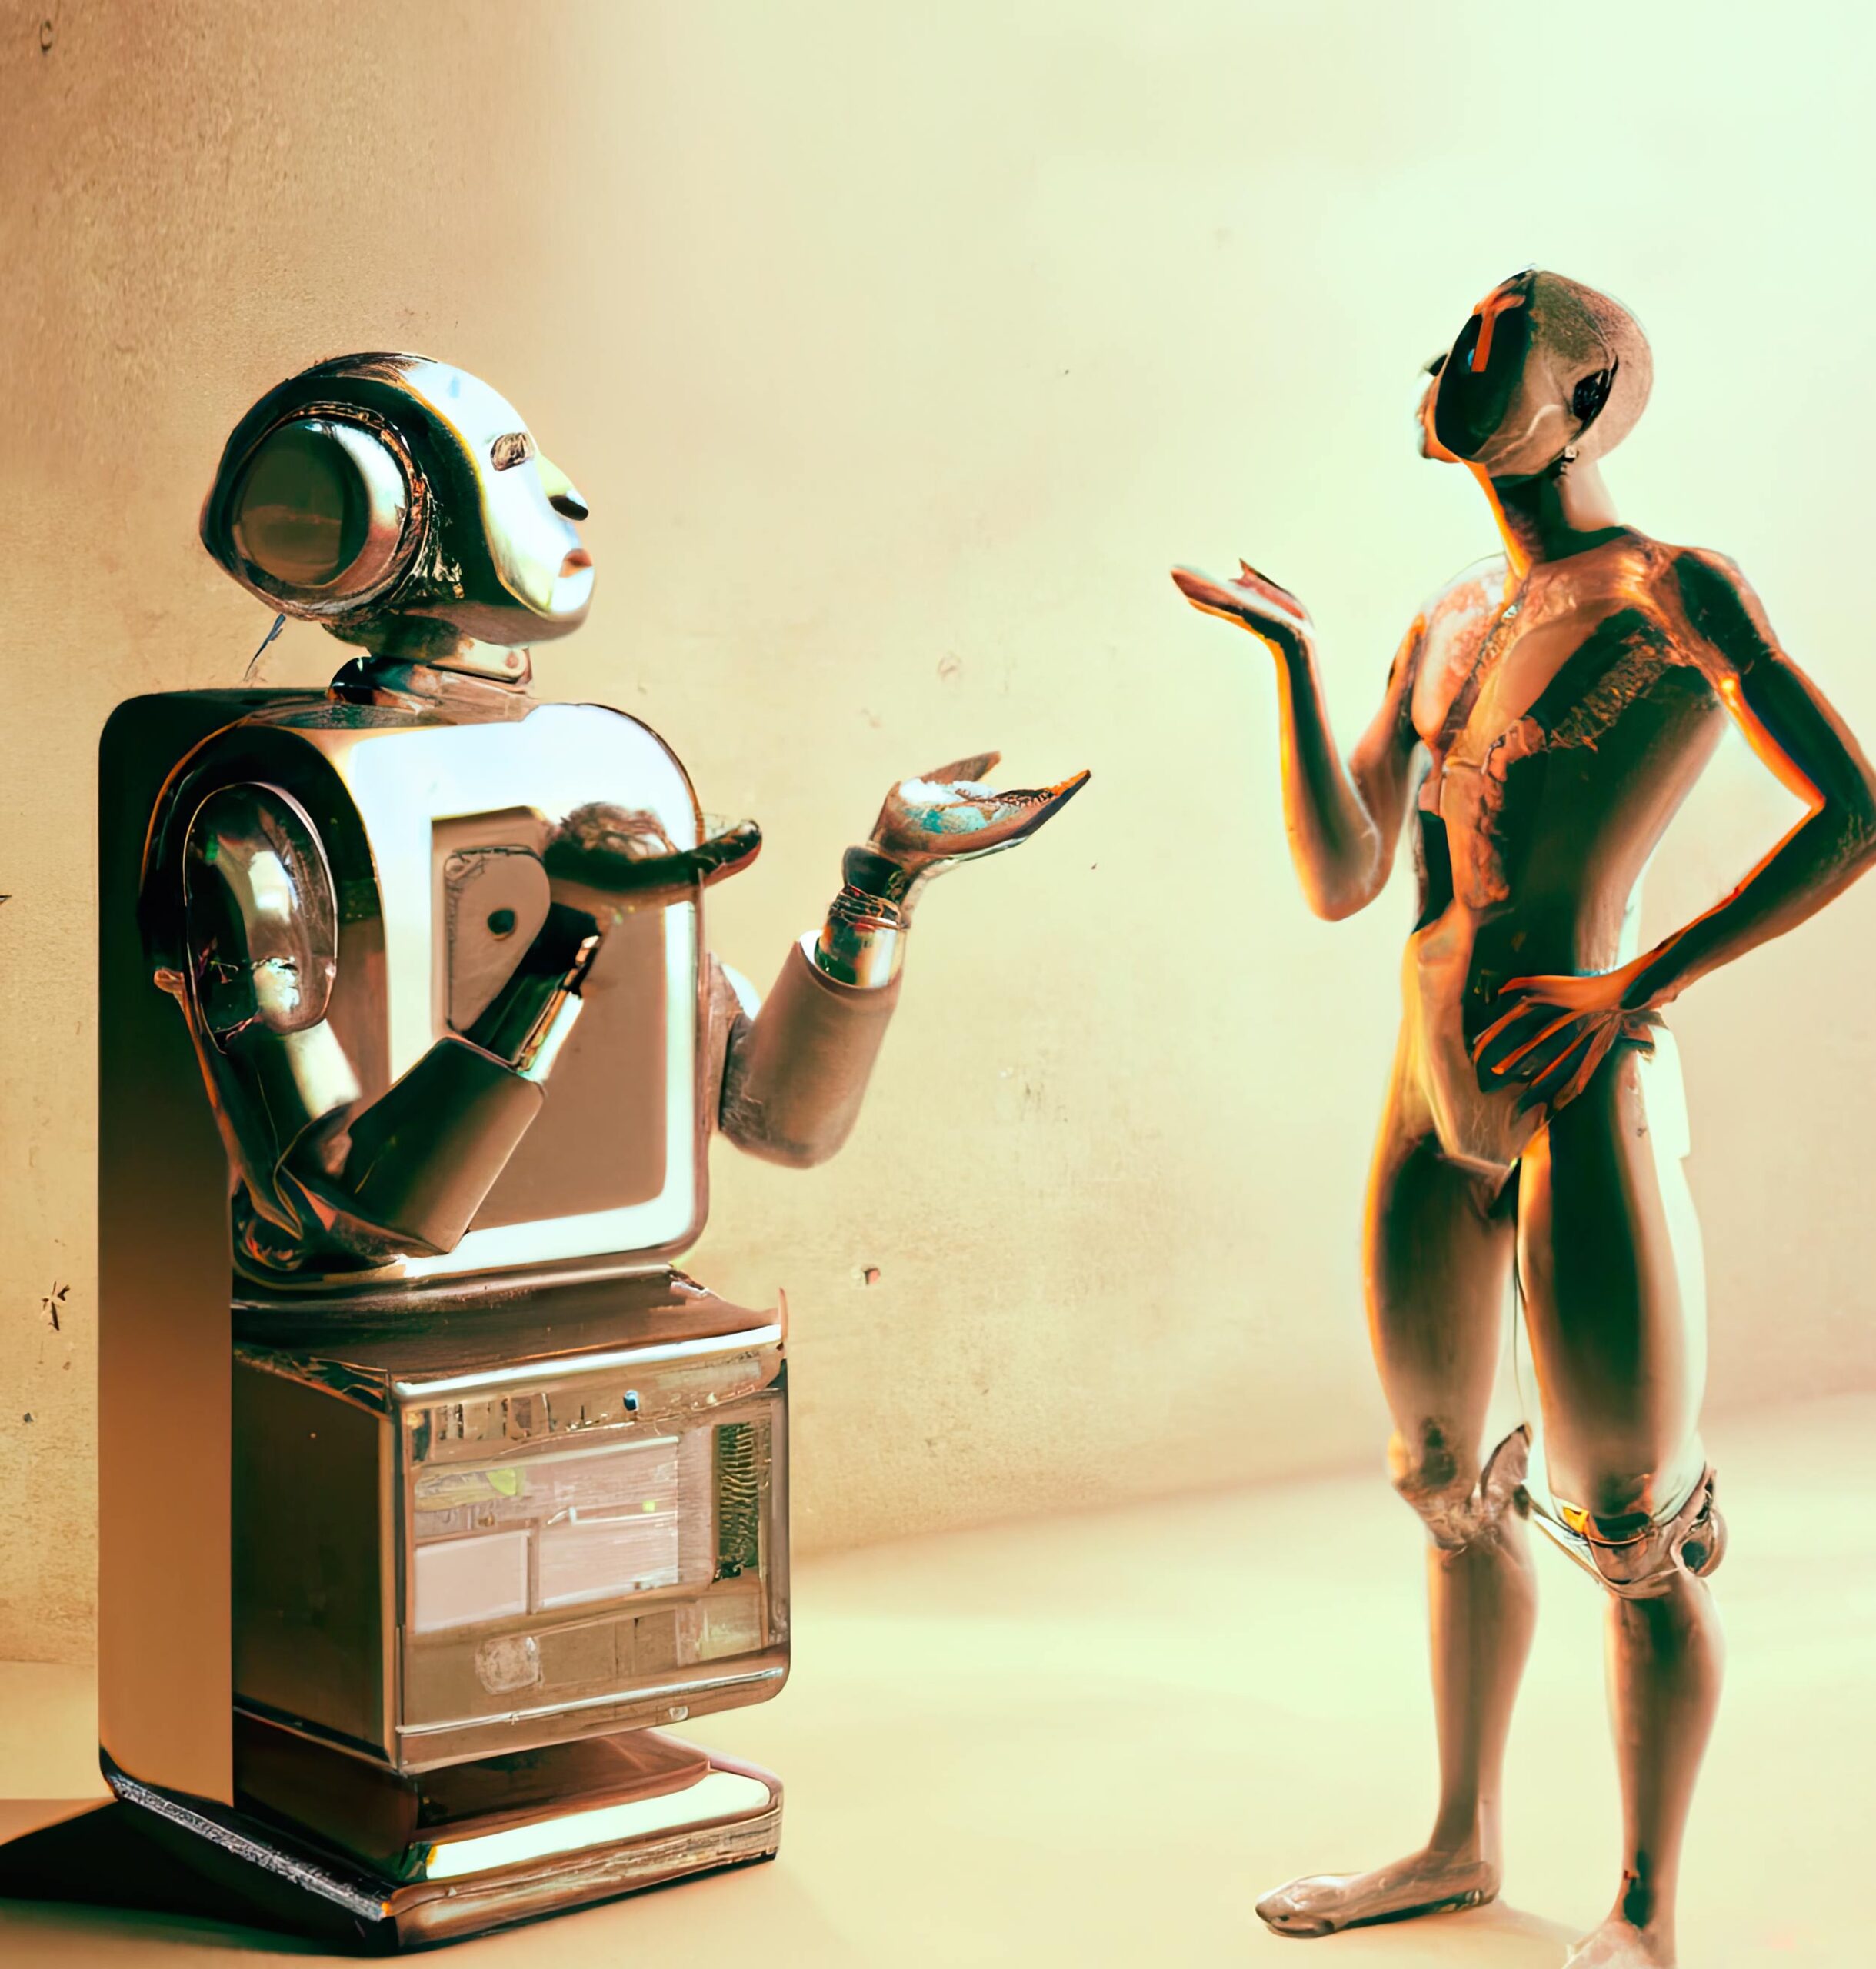 A robot and a humanoid being talk to each other